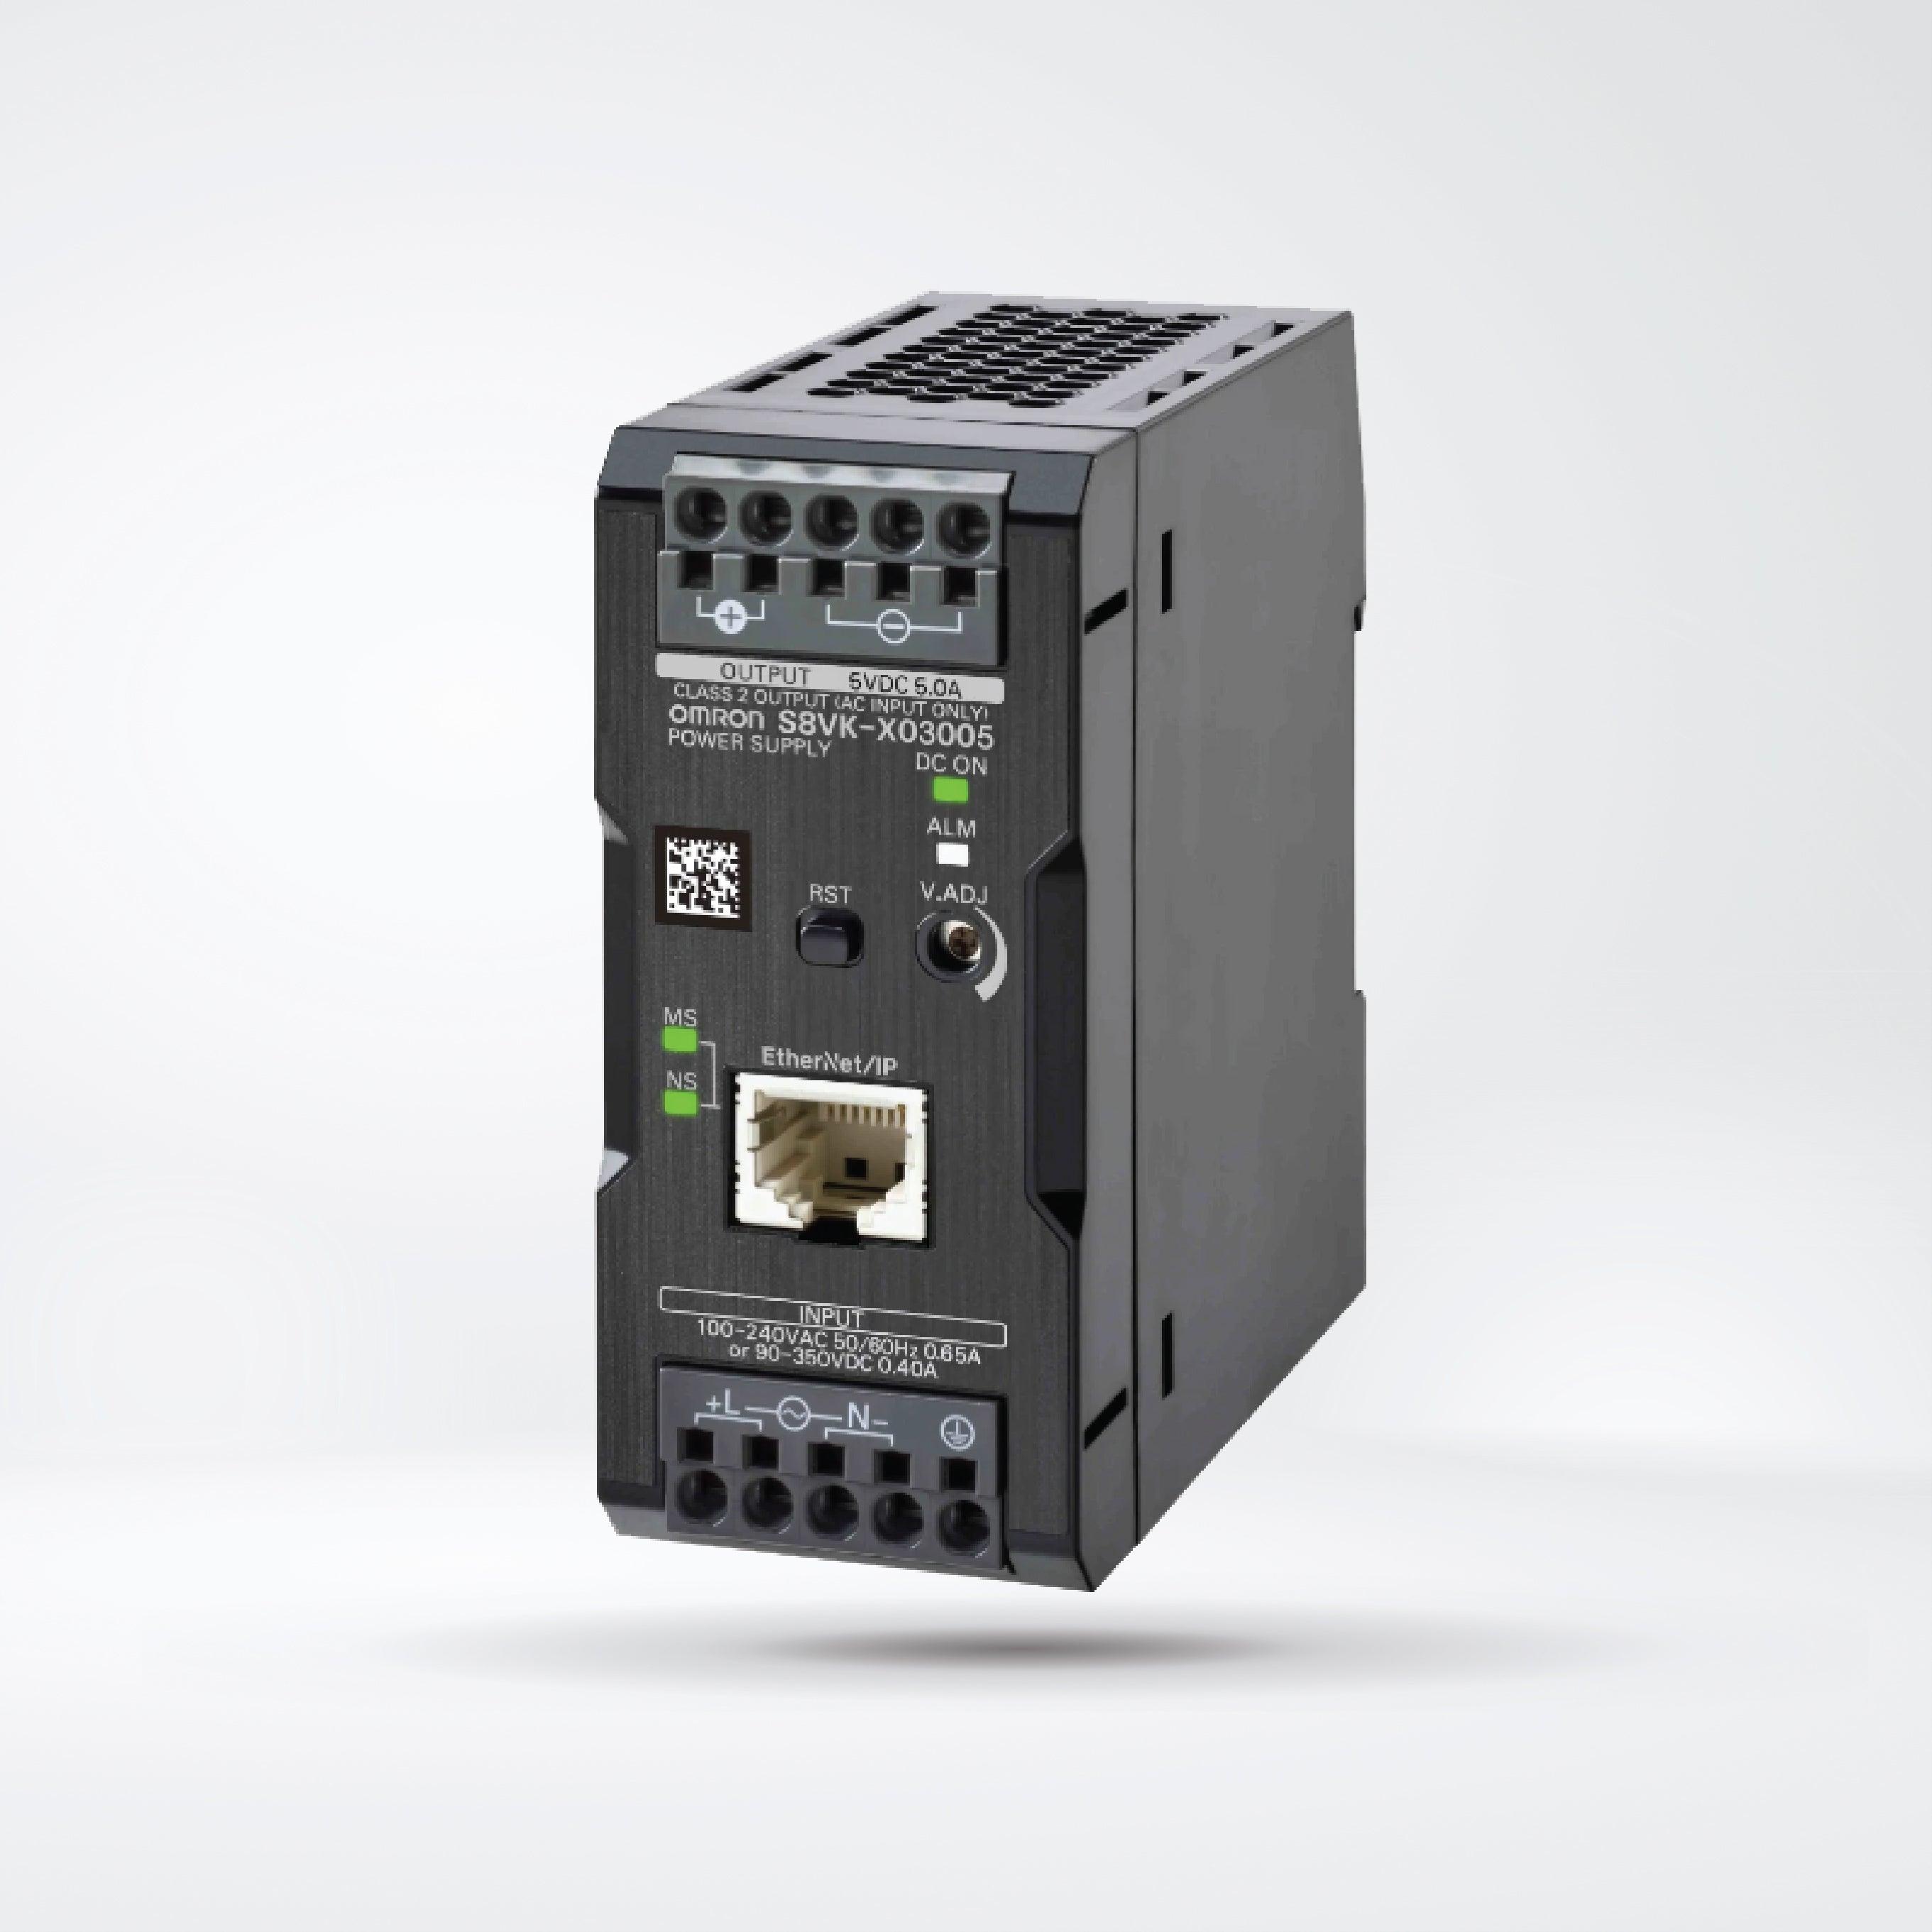 S8VK-X03005-EIP Switch Mode Power Supply,with EtherNet/IP, Modbus TCP, 30 W, 5 VDC - Riverplus